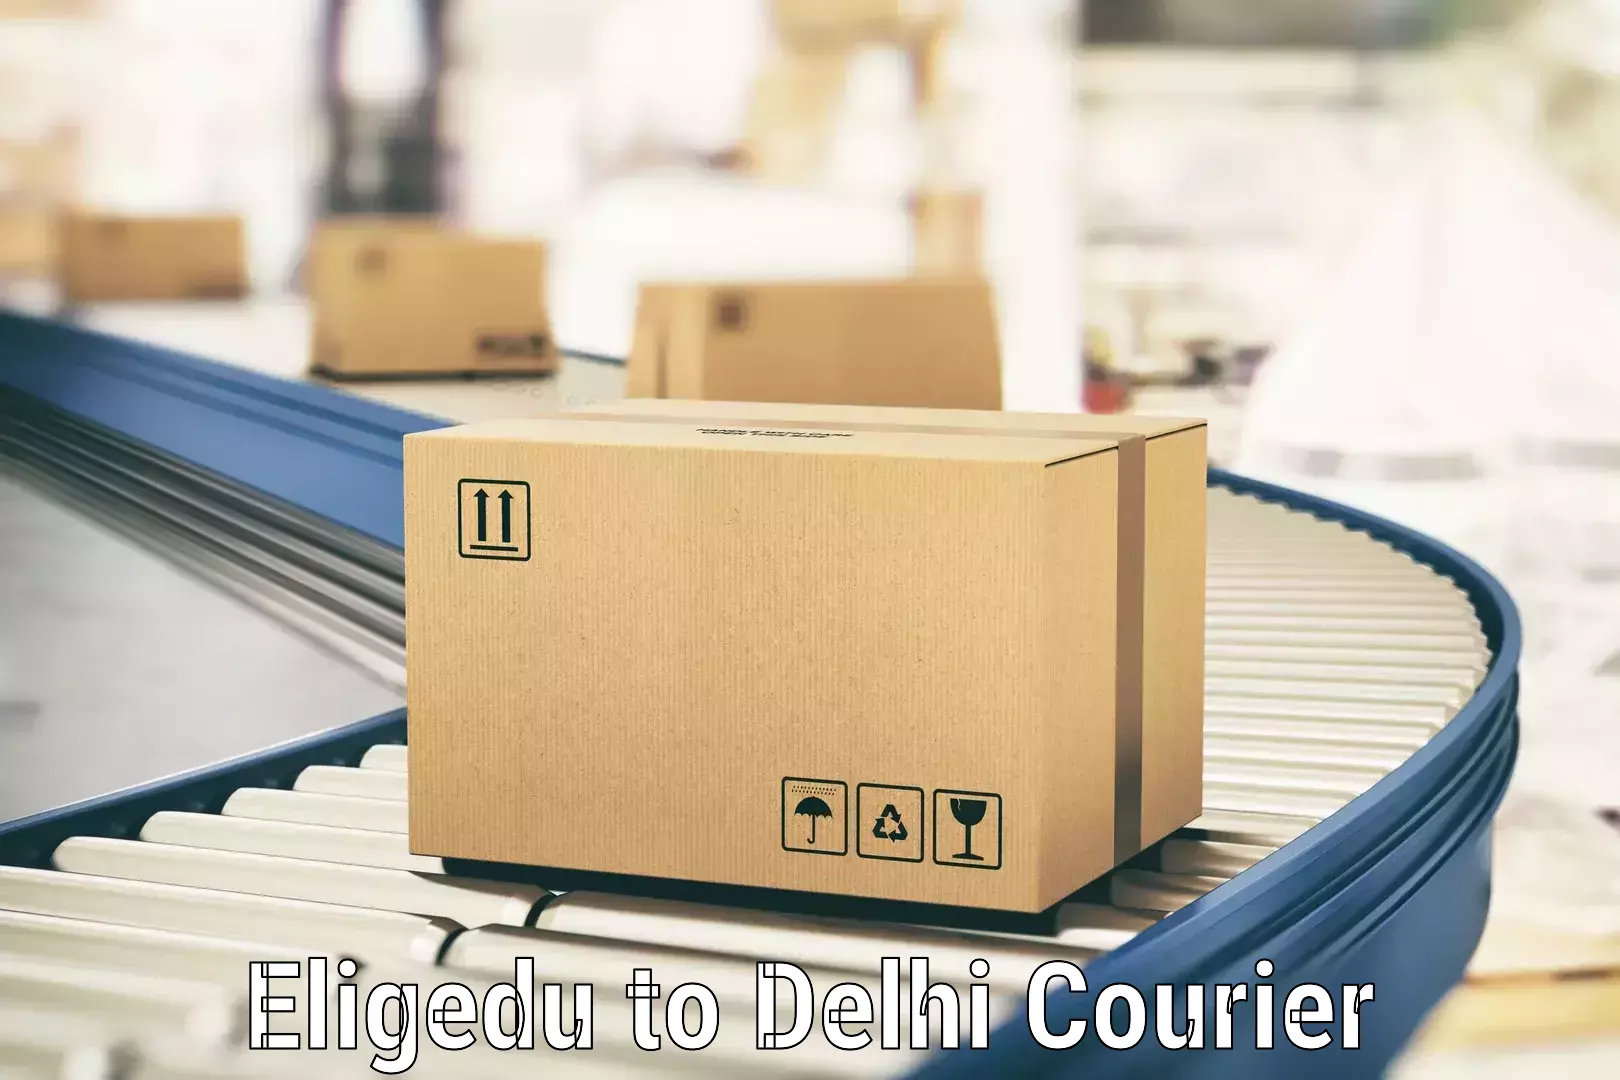 Tailored delivery services Eligedu to Subhash Nagar